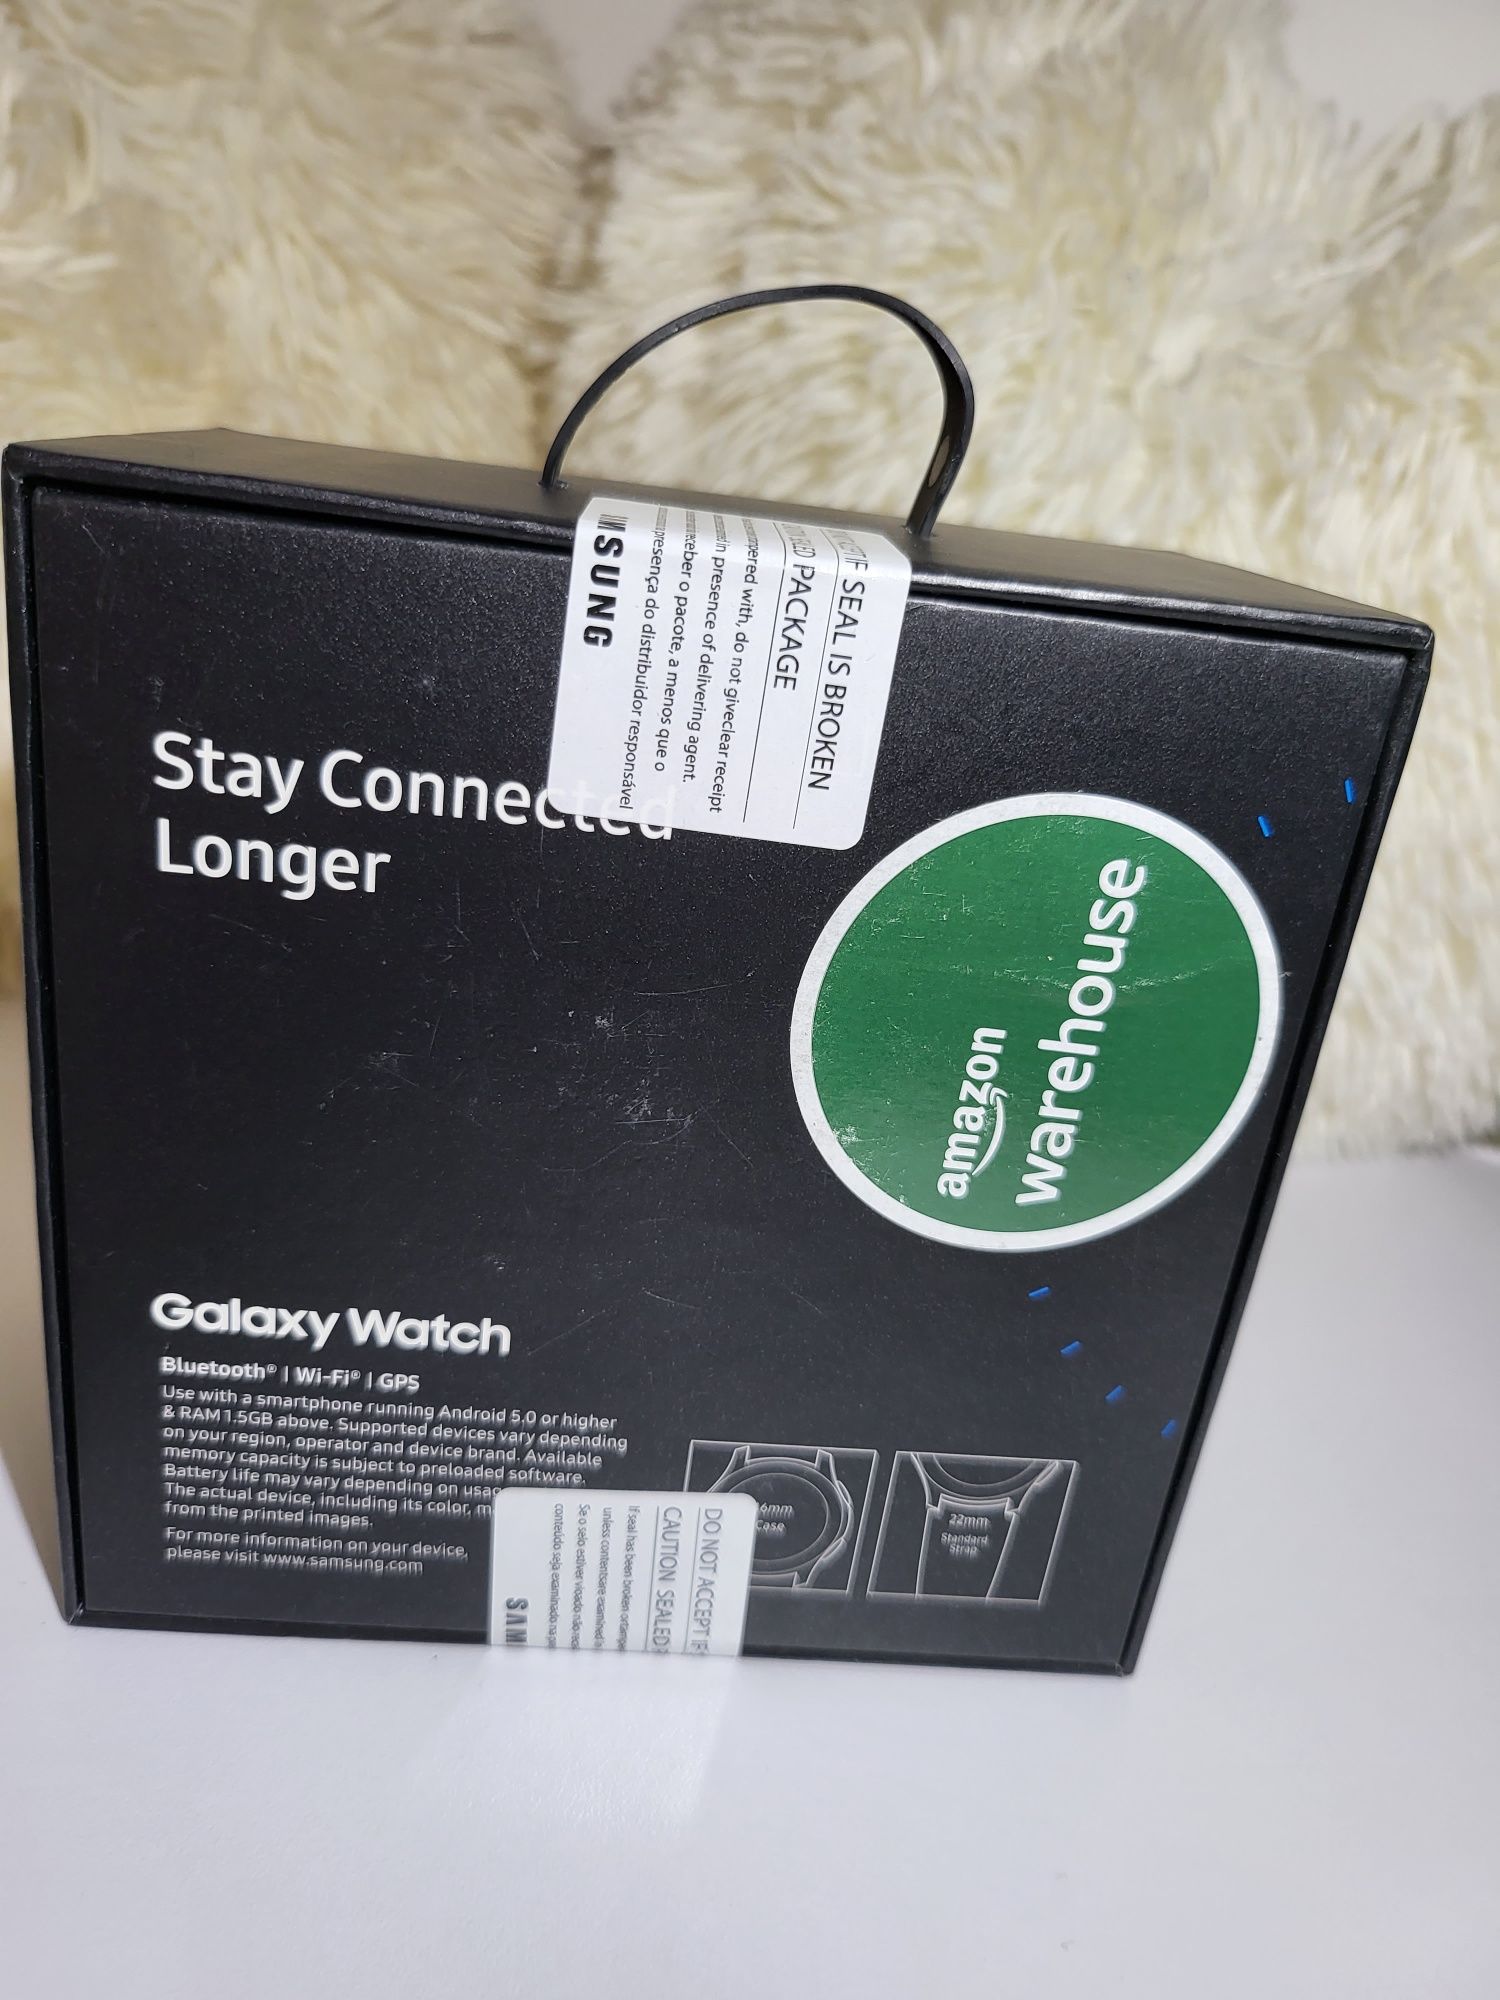 Samsung Galaxy Watch Stay Connected Longer 46mm